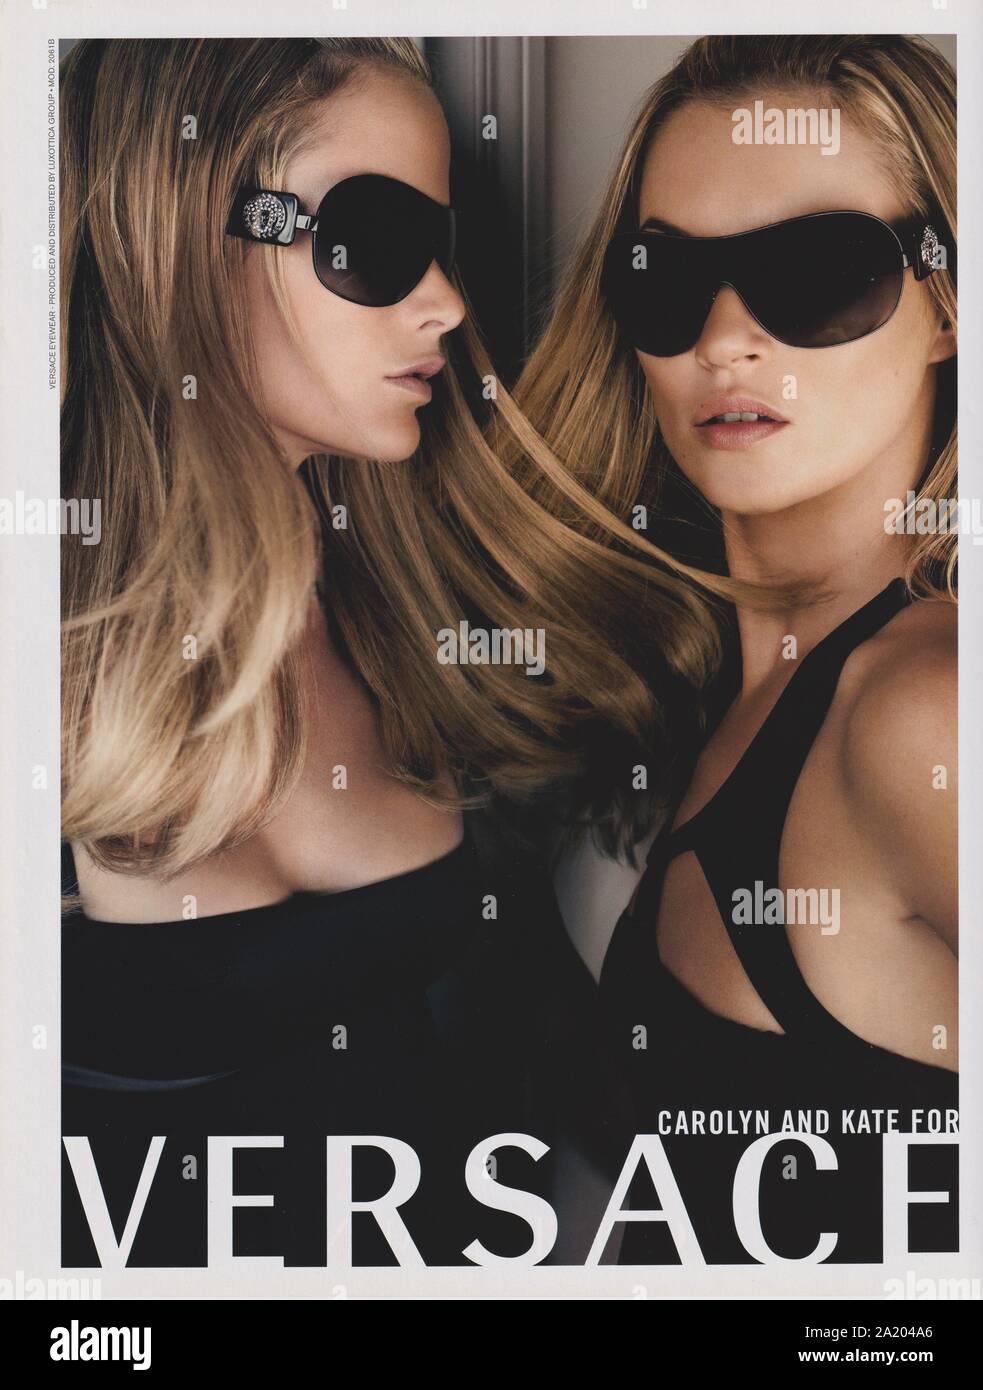 poster advertising VERSACE fashion house with Kate Moss, Carolyn Murphy in  paper magazine from 2007, advertisement, creative VERSACE 2000s advert  Stock Photo - Alamy